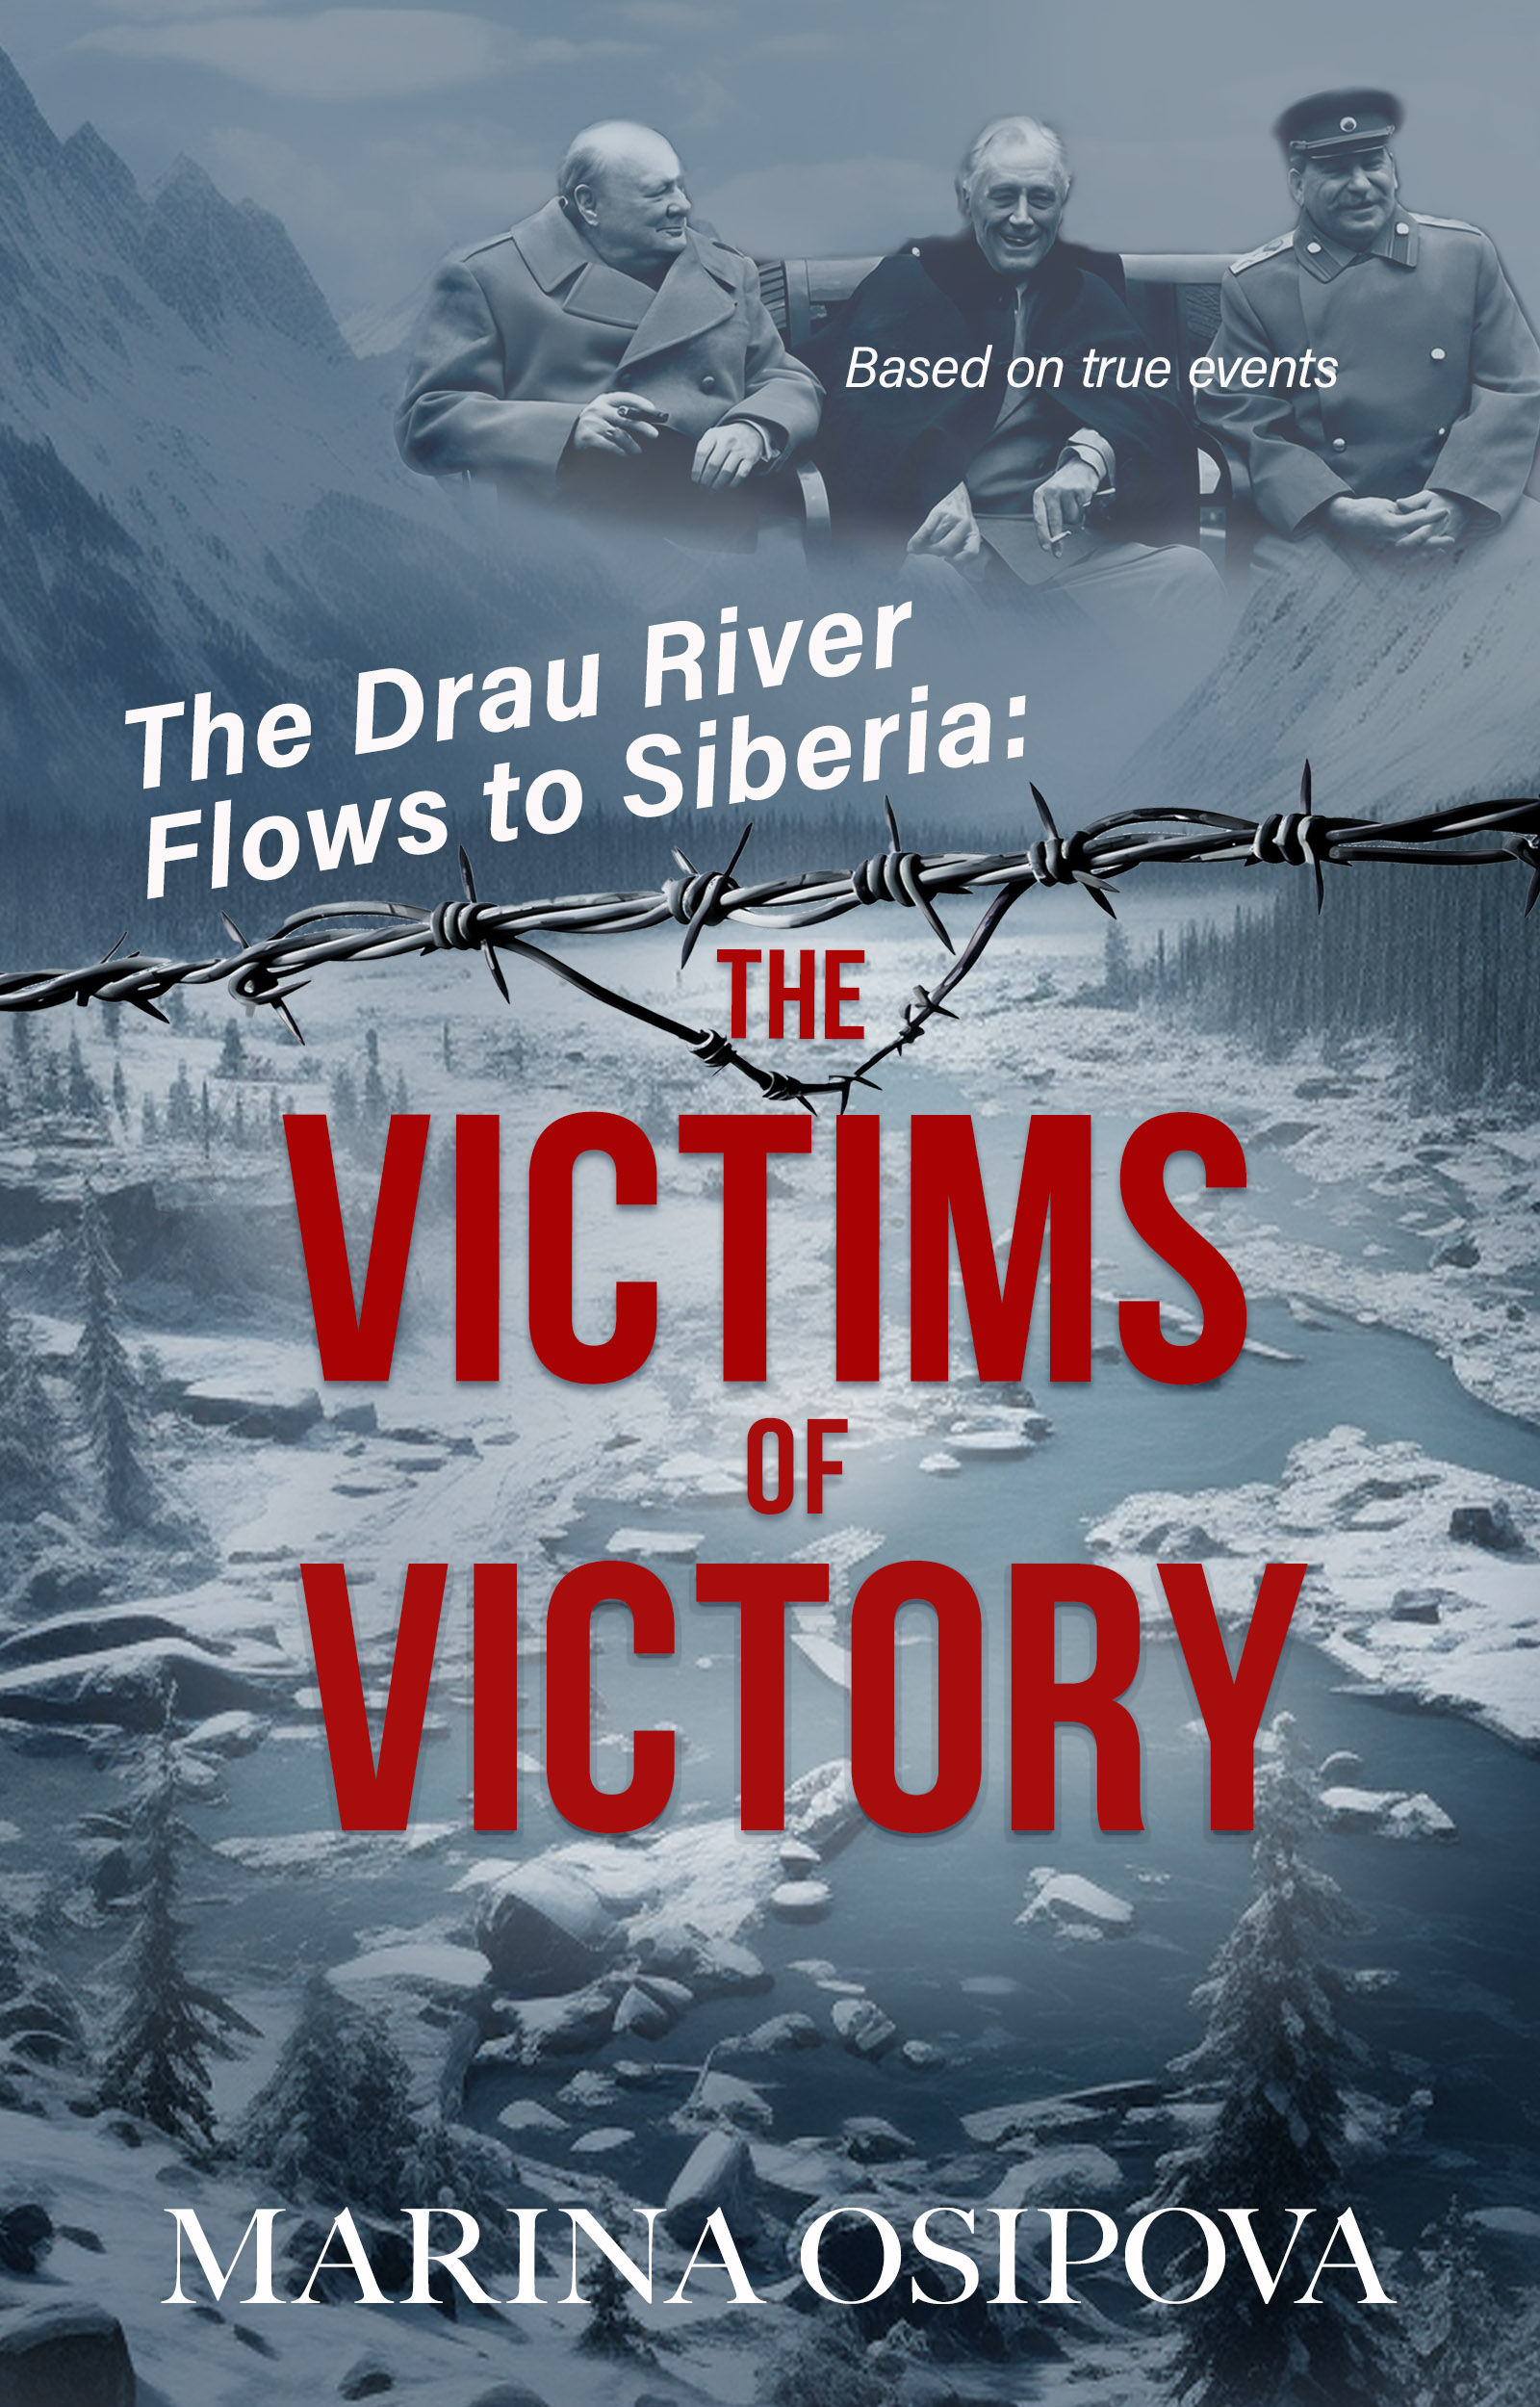 Book Cover for The Drau River Flows to Siberia: The Victims of Victory by Marina Osipova